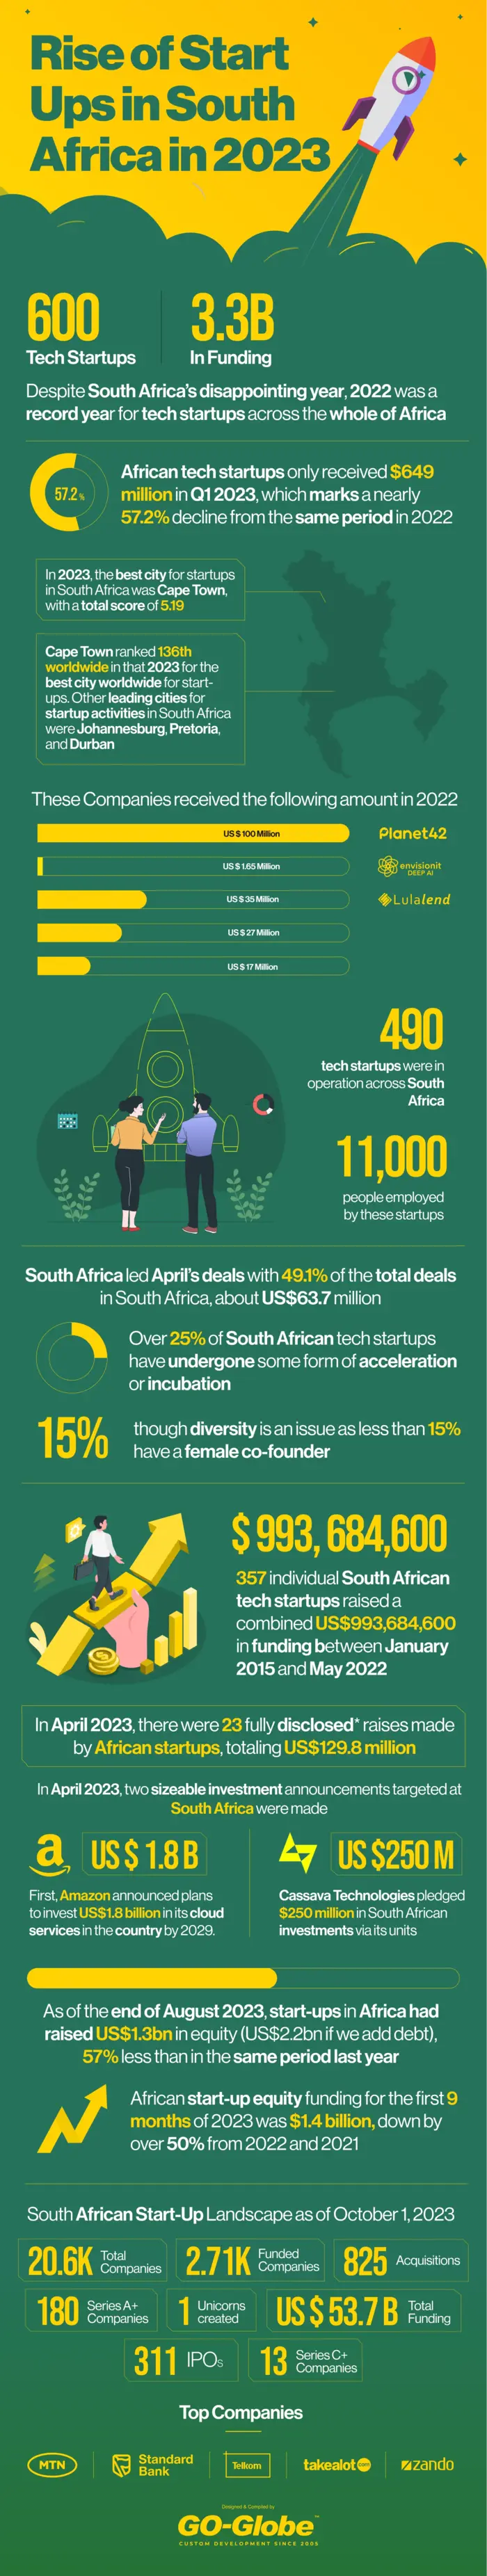 Rise of Startups in South Africa